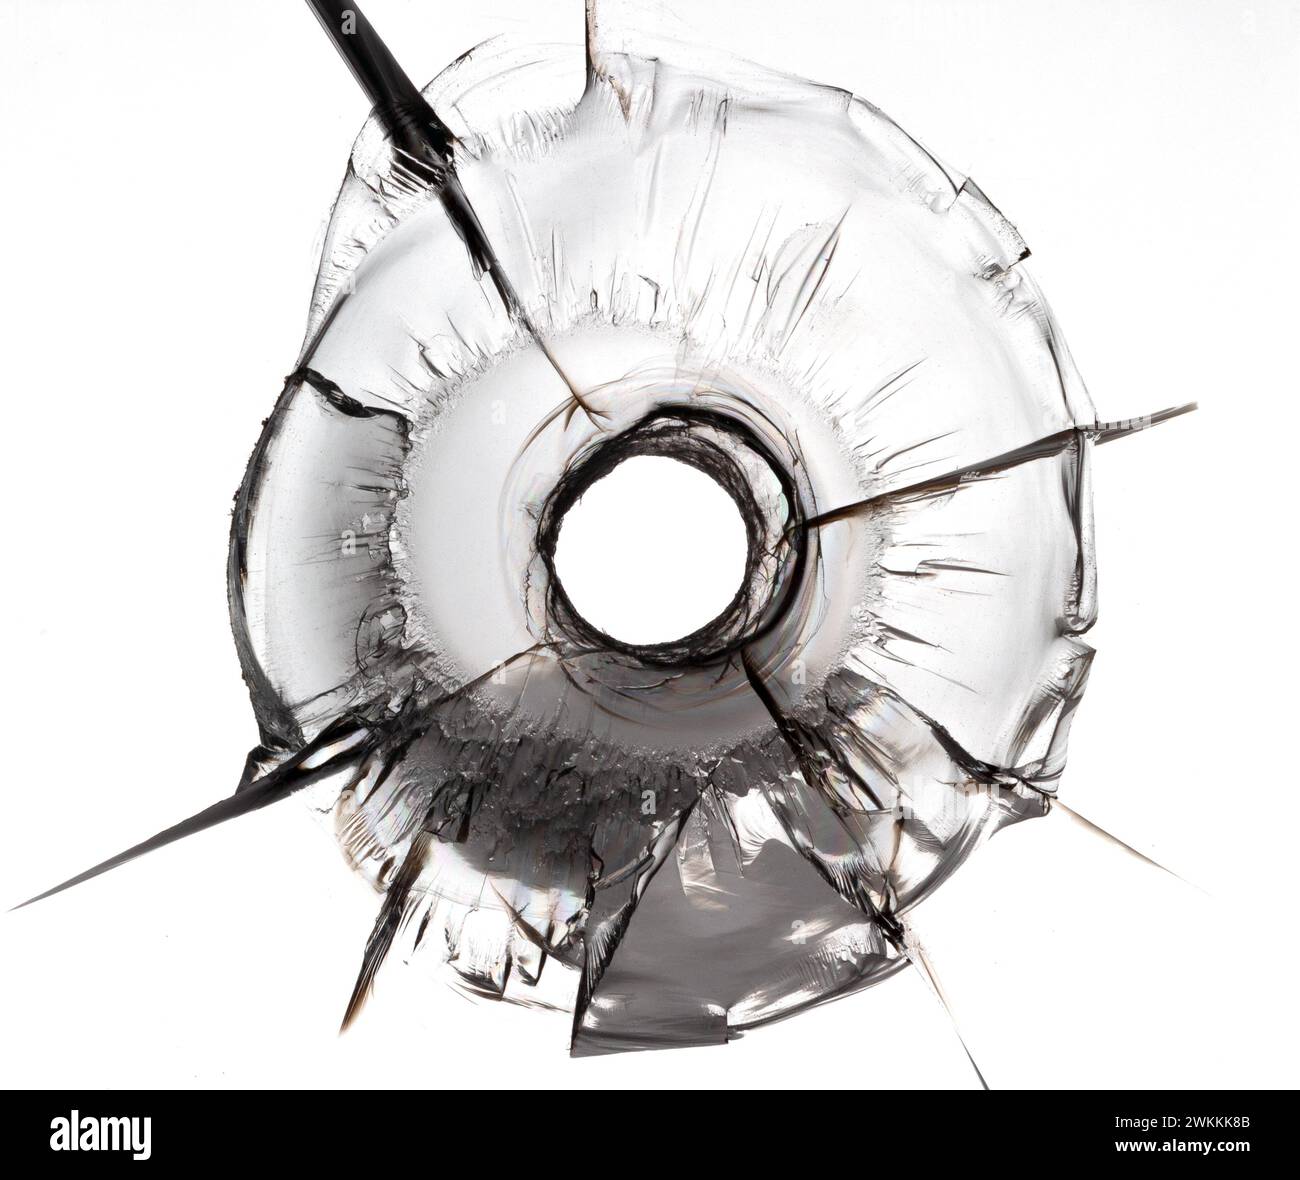 Isolated bullet hole on glass. Cracked glass texture on white background. Stock Photo